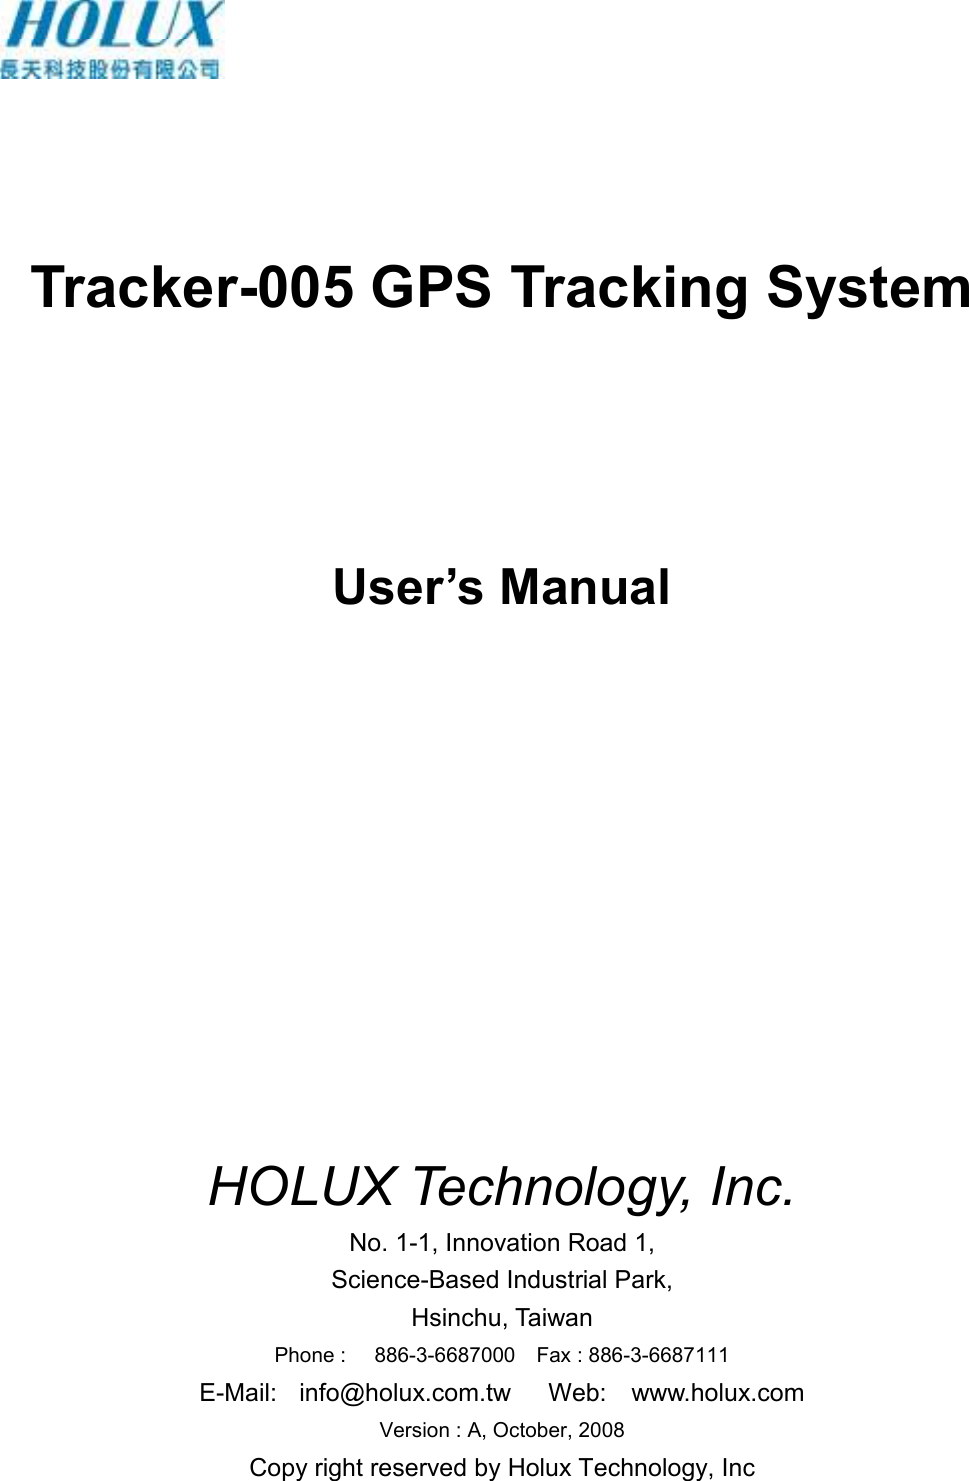       Tracker-005 GPS Tracking System    User’s Manual               HOLUX Technology, Inc. No. 1-1, Innovation Road 1, Science-Based Industrial Park, Hsinchu, Taiwan Phone :  886-3-6687000    Fax : 886-3-6687111 E-Mail:  info@holux.com.tw      Web:    www.holux.com Version : A, October, 2008 Copy right reserved by Holux Technology, Inc  